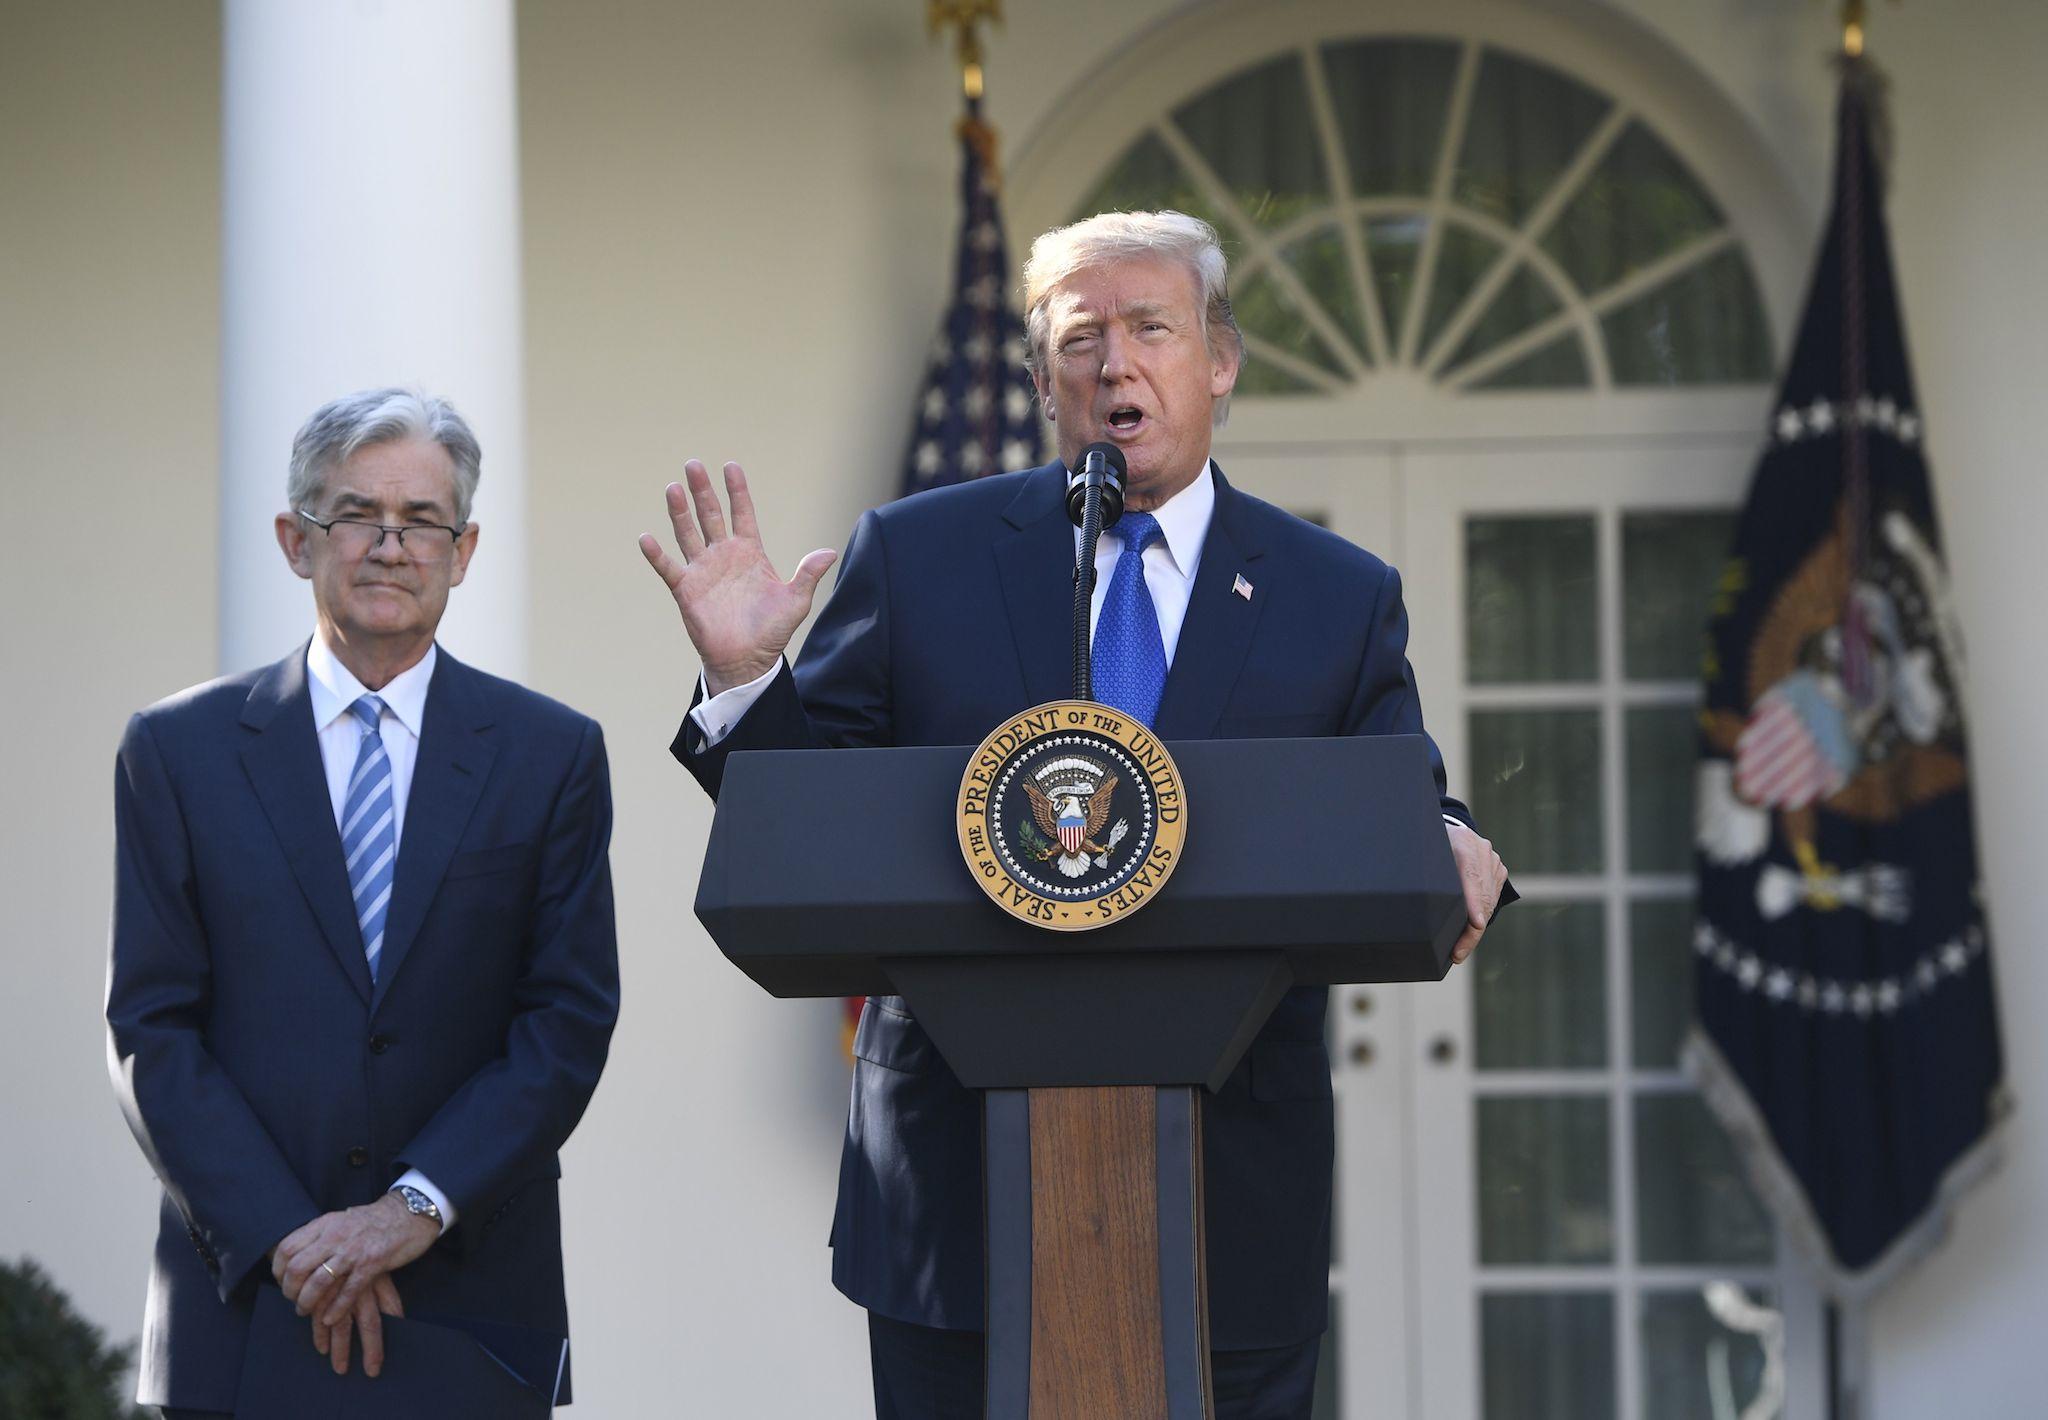 US President Donald Trump announces his nominee for Chairman of the Federal Reserve, Jerome Powell (SAUL LOEB/AFP/Getty Images)